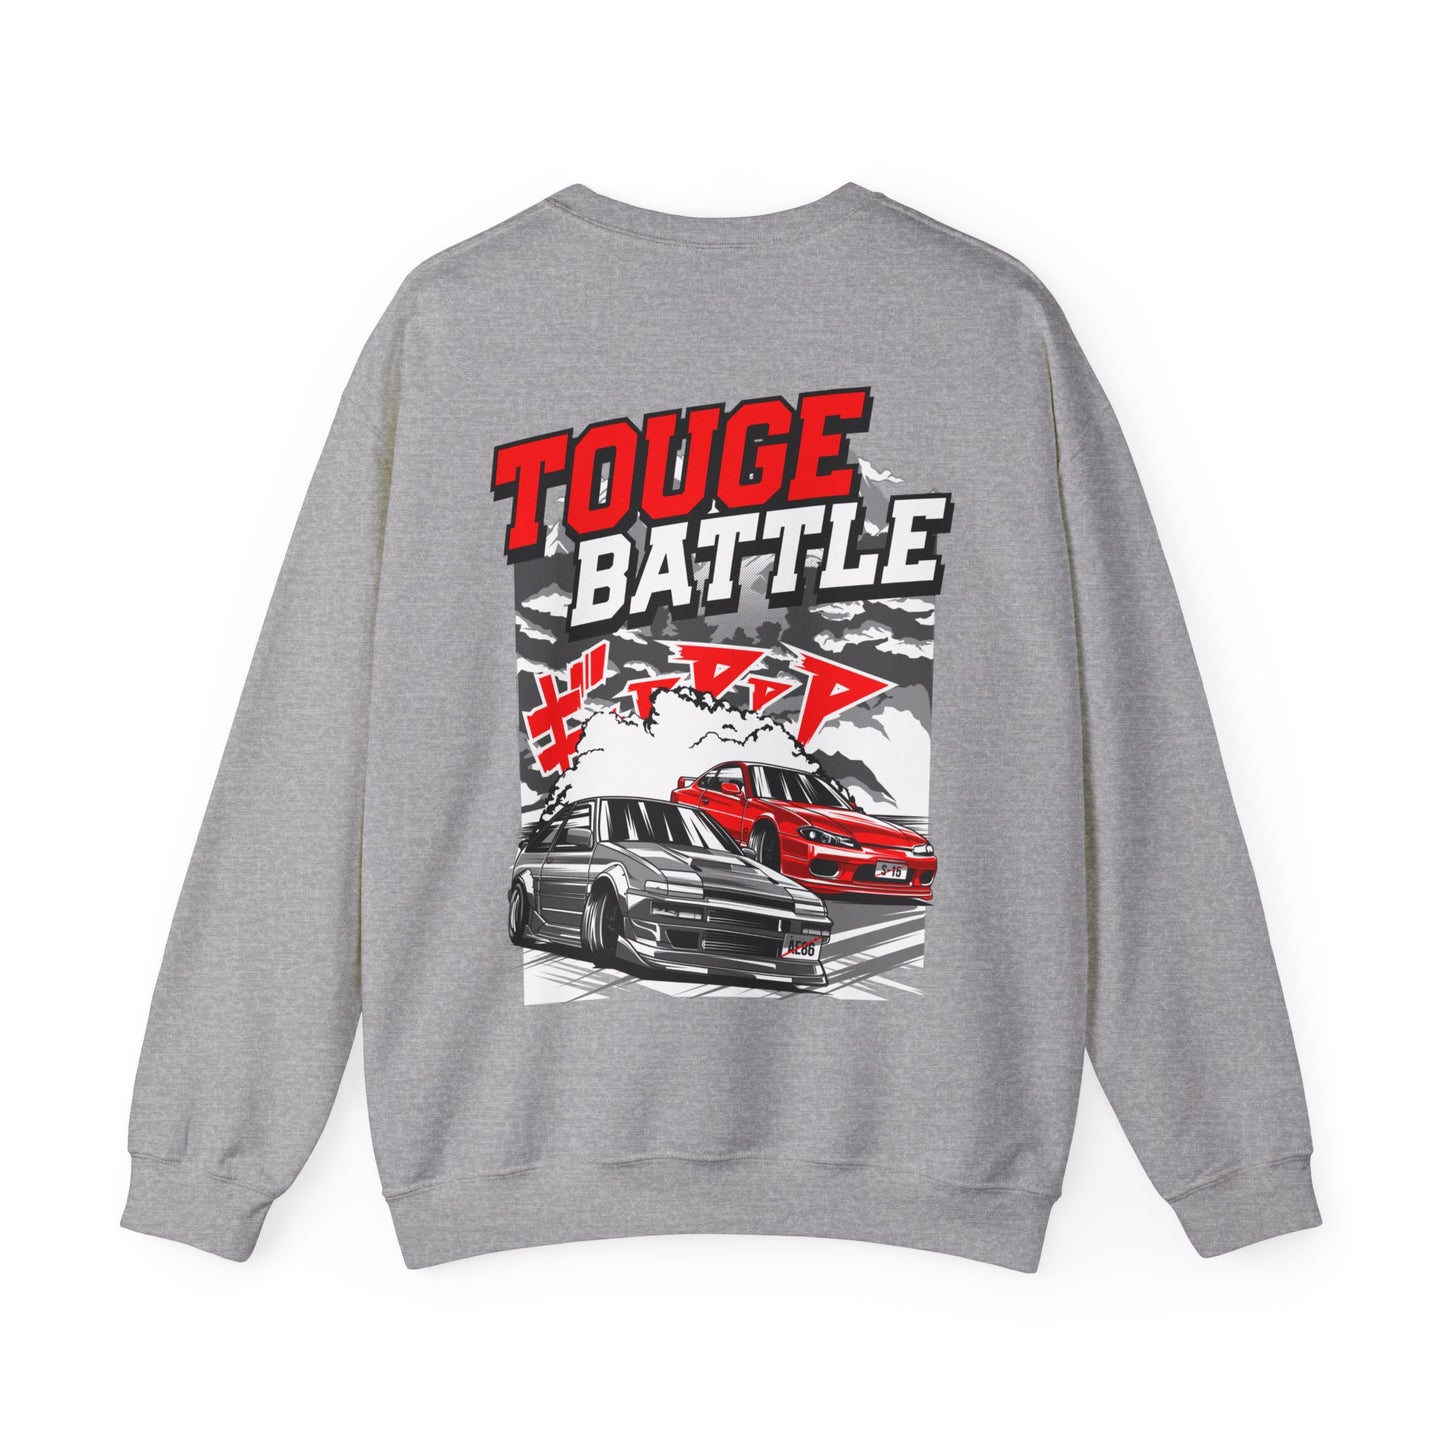 TOUGE BATTLE "AE86 VS S-15" GRAPHIC SWEATER